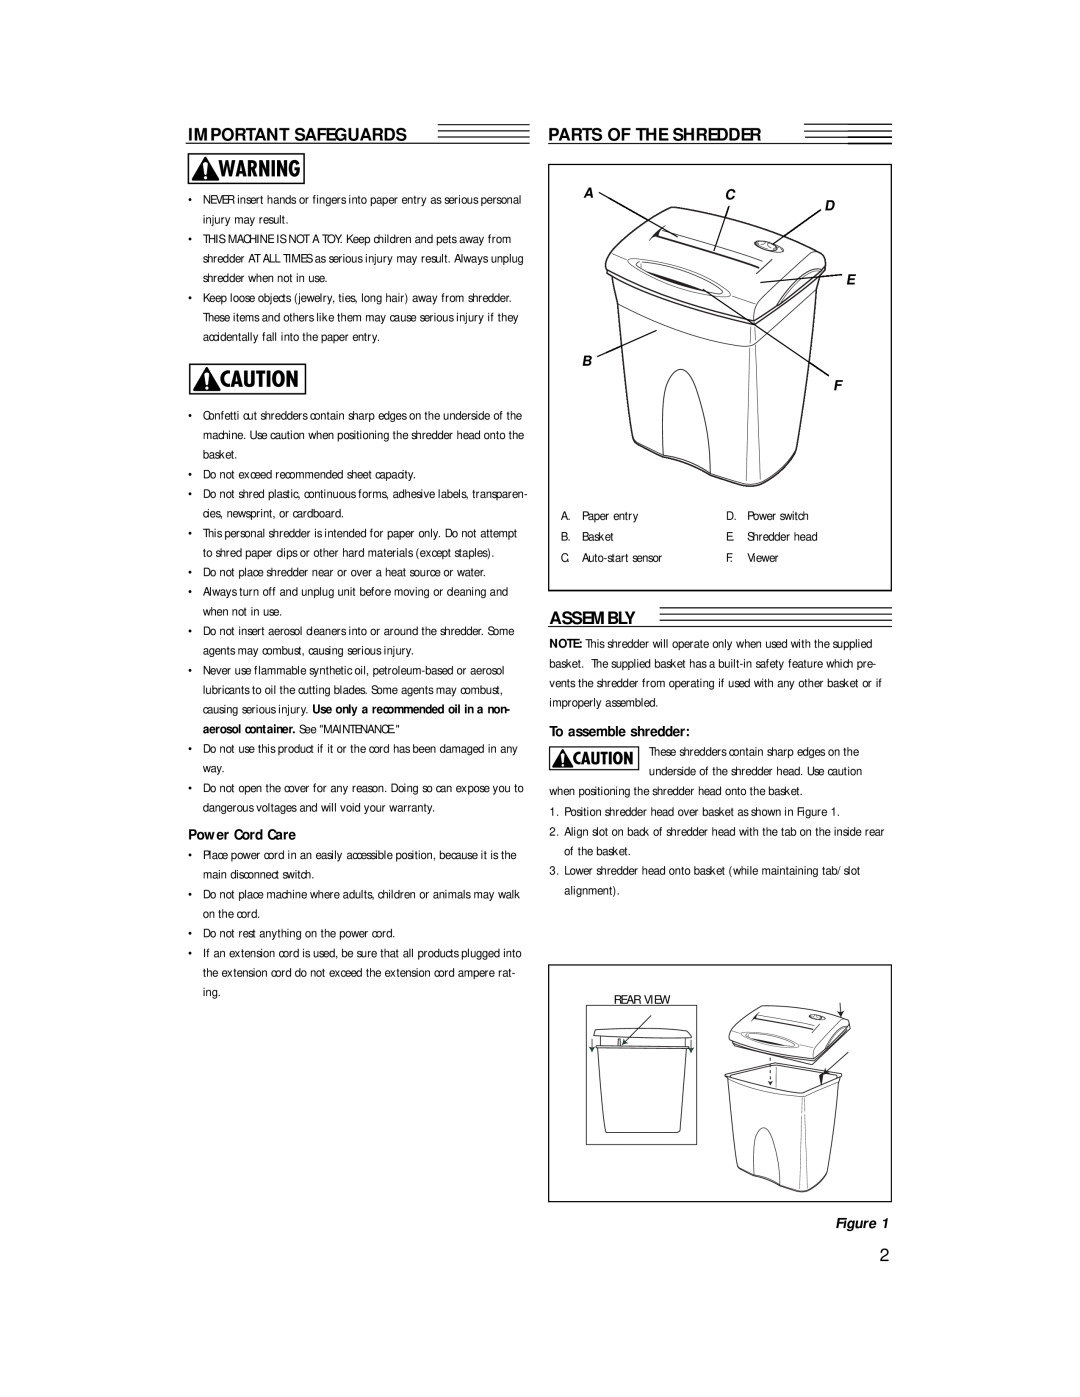 Fellowes P600C-2 manual Assembly, Important Safeguards, Parts Of The Shredder, Power Cord Care, E B F, To assemble shredder 